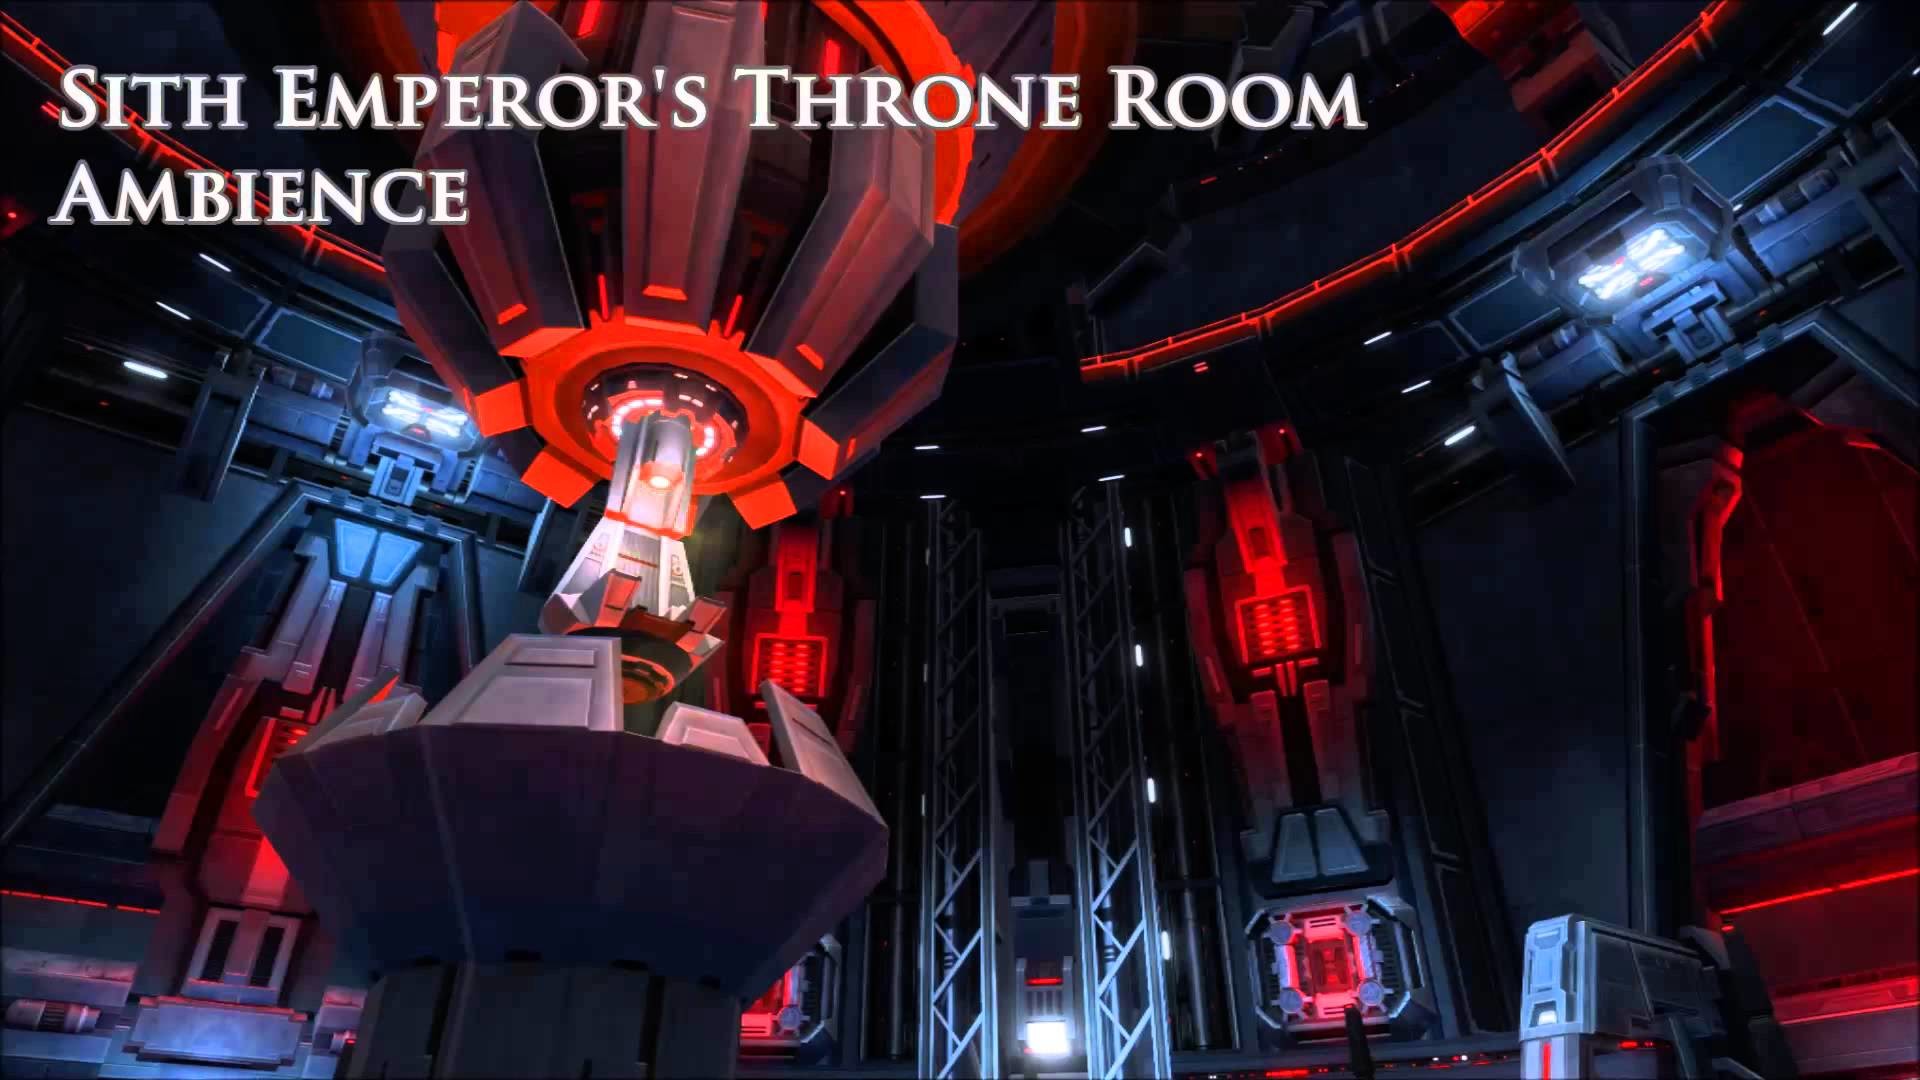 1920x1080 Sith Emperor's Throne Room - Star Wars Background Ambience